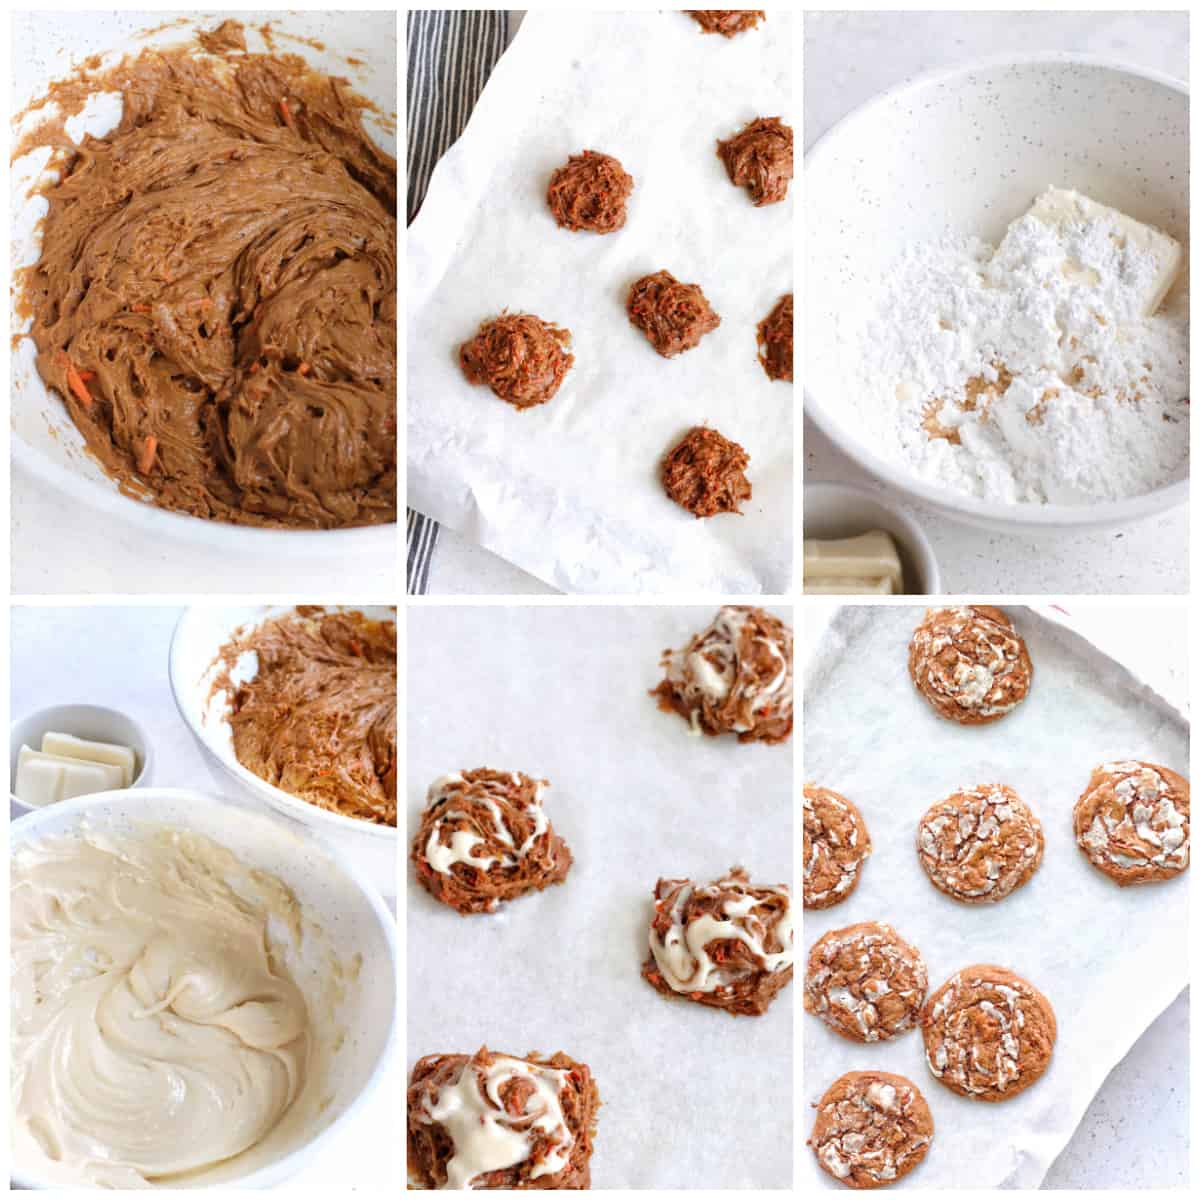 Step by step photos on how to make Cream Cheese Carrot Cake Cookies.